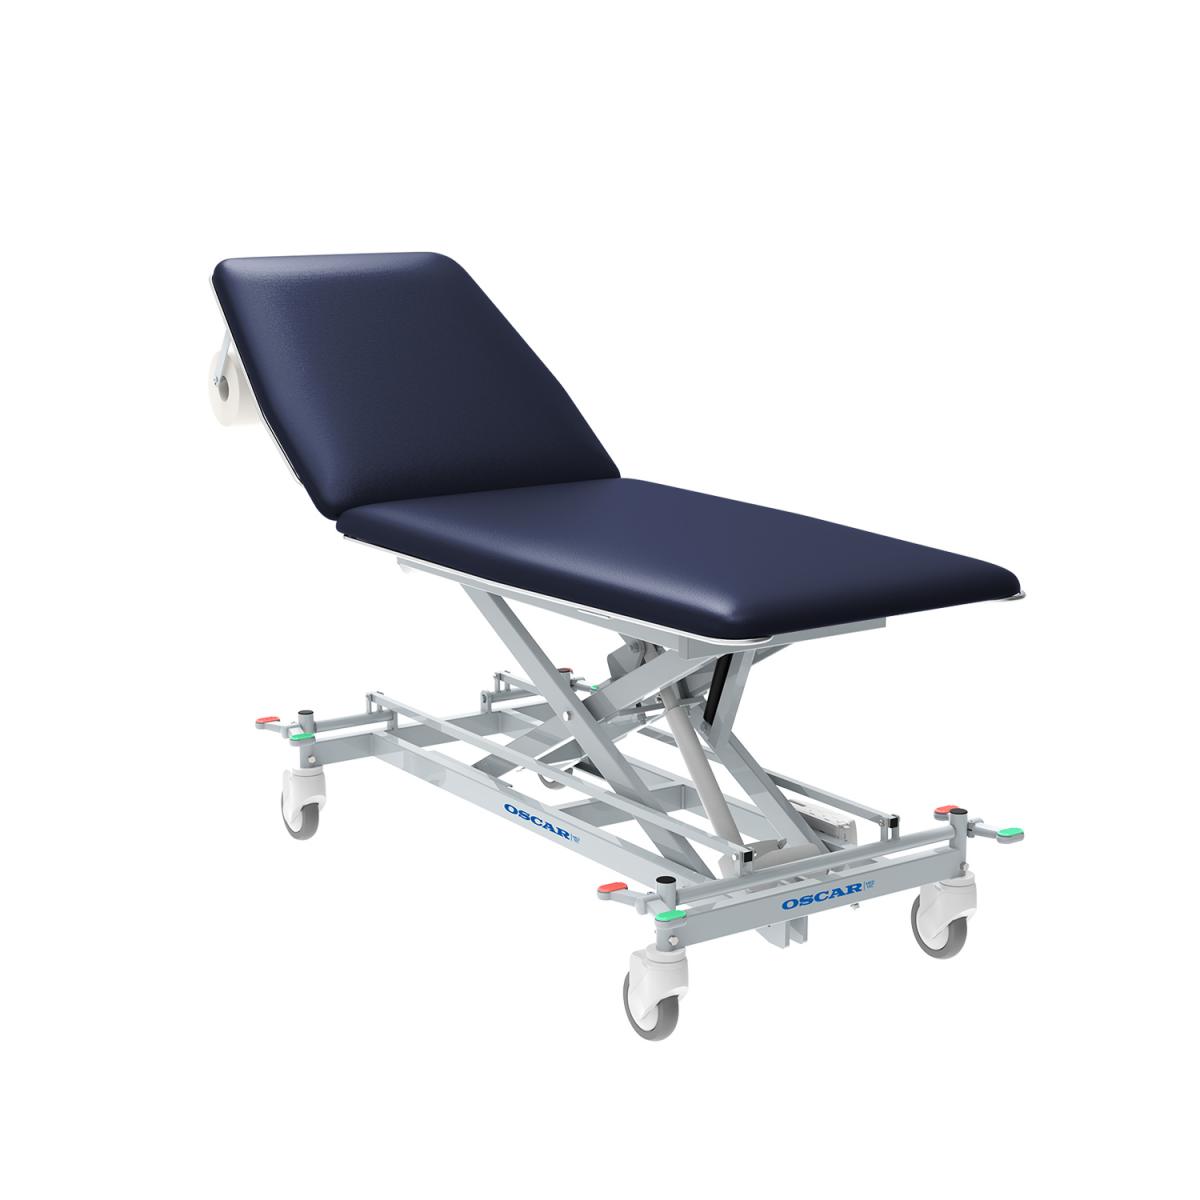 Examination table Standard, electric